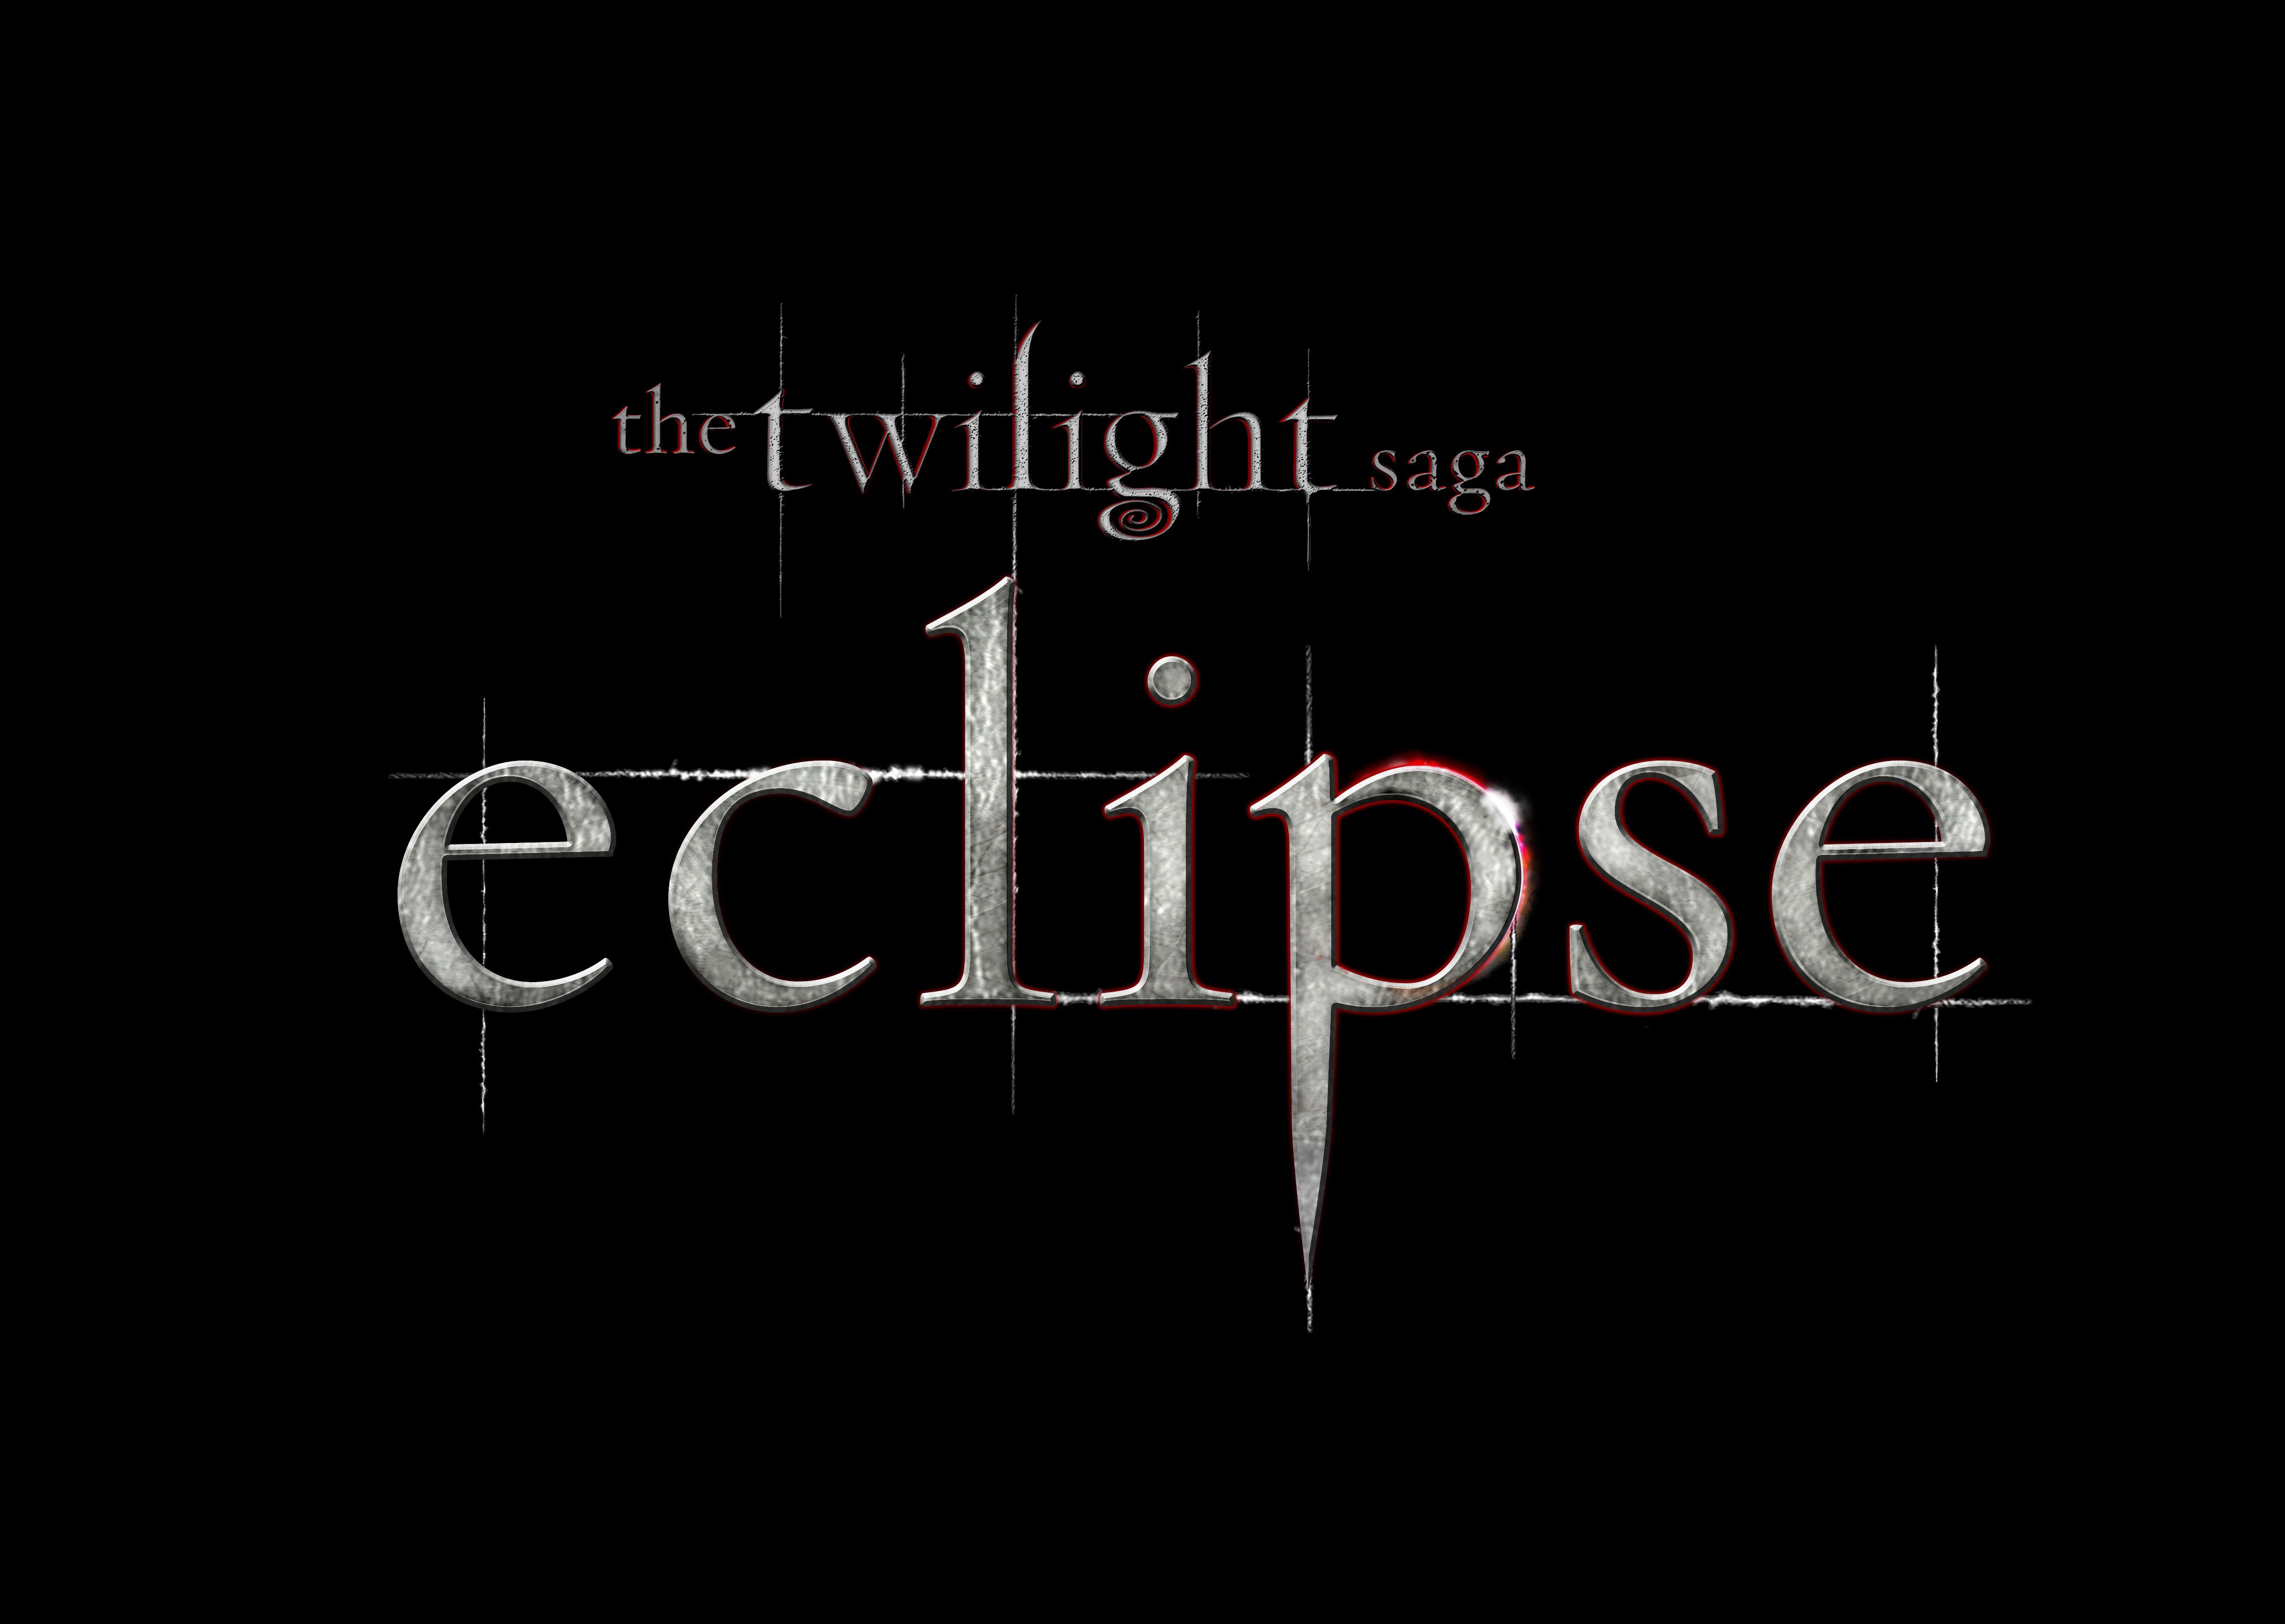 The Twilight Saga: Eclipse coming to IMAXIMAX Corporation and Summit Entertainment announced today that {0}, the third film in the studio's {1} franchise, will be released to IMAX theatres simultaneously with the film's launch on June 30, 2010. Directed by David Slade ({2}, {3}) and starring Kristen Stewart, Robert Pattinson and Taylor Lautner, {4} will be digitally re-mastered into the unparalleled image and sound quality of The IMAX Experience with proprietary IMAX DMR (Digital Re-mastering) t